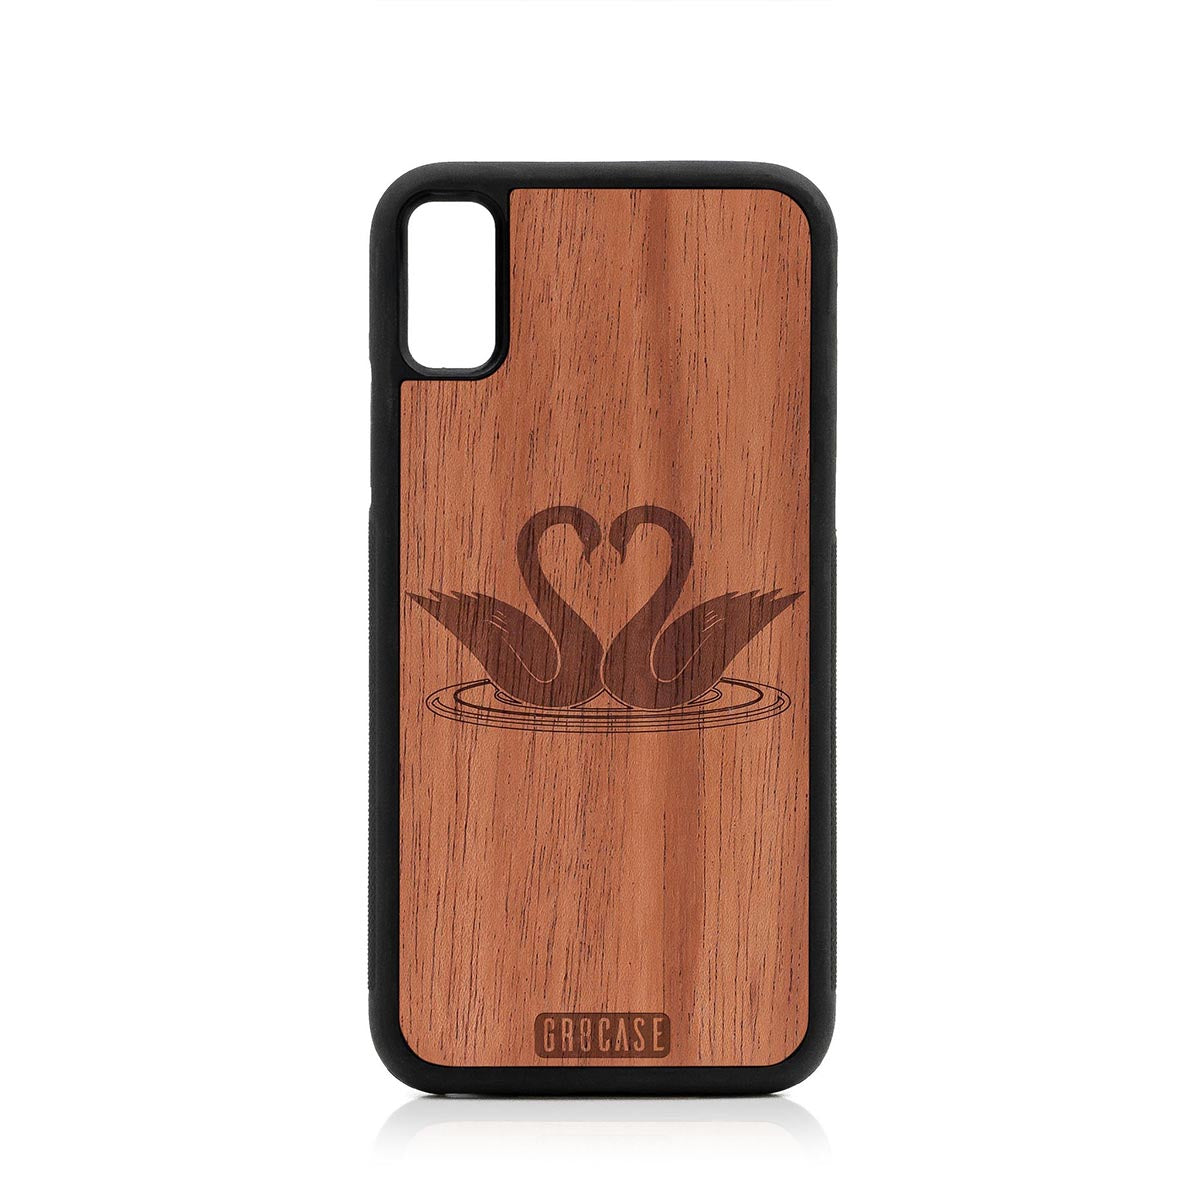 Swans Design Wood Case For iPhone XS Max